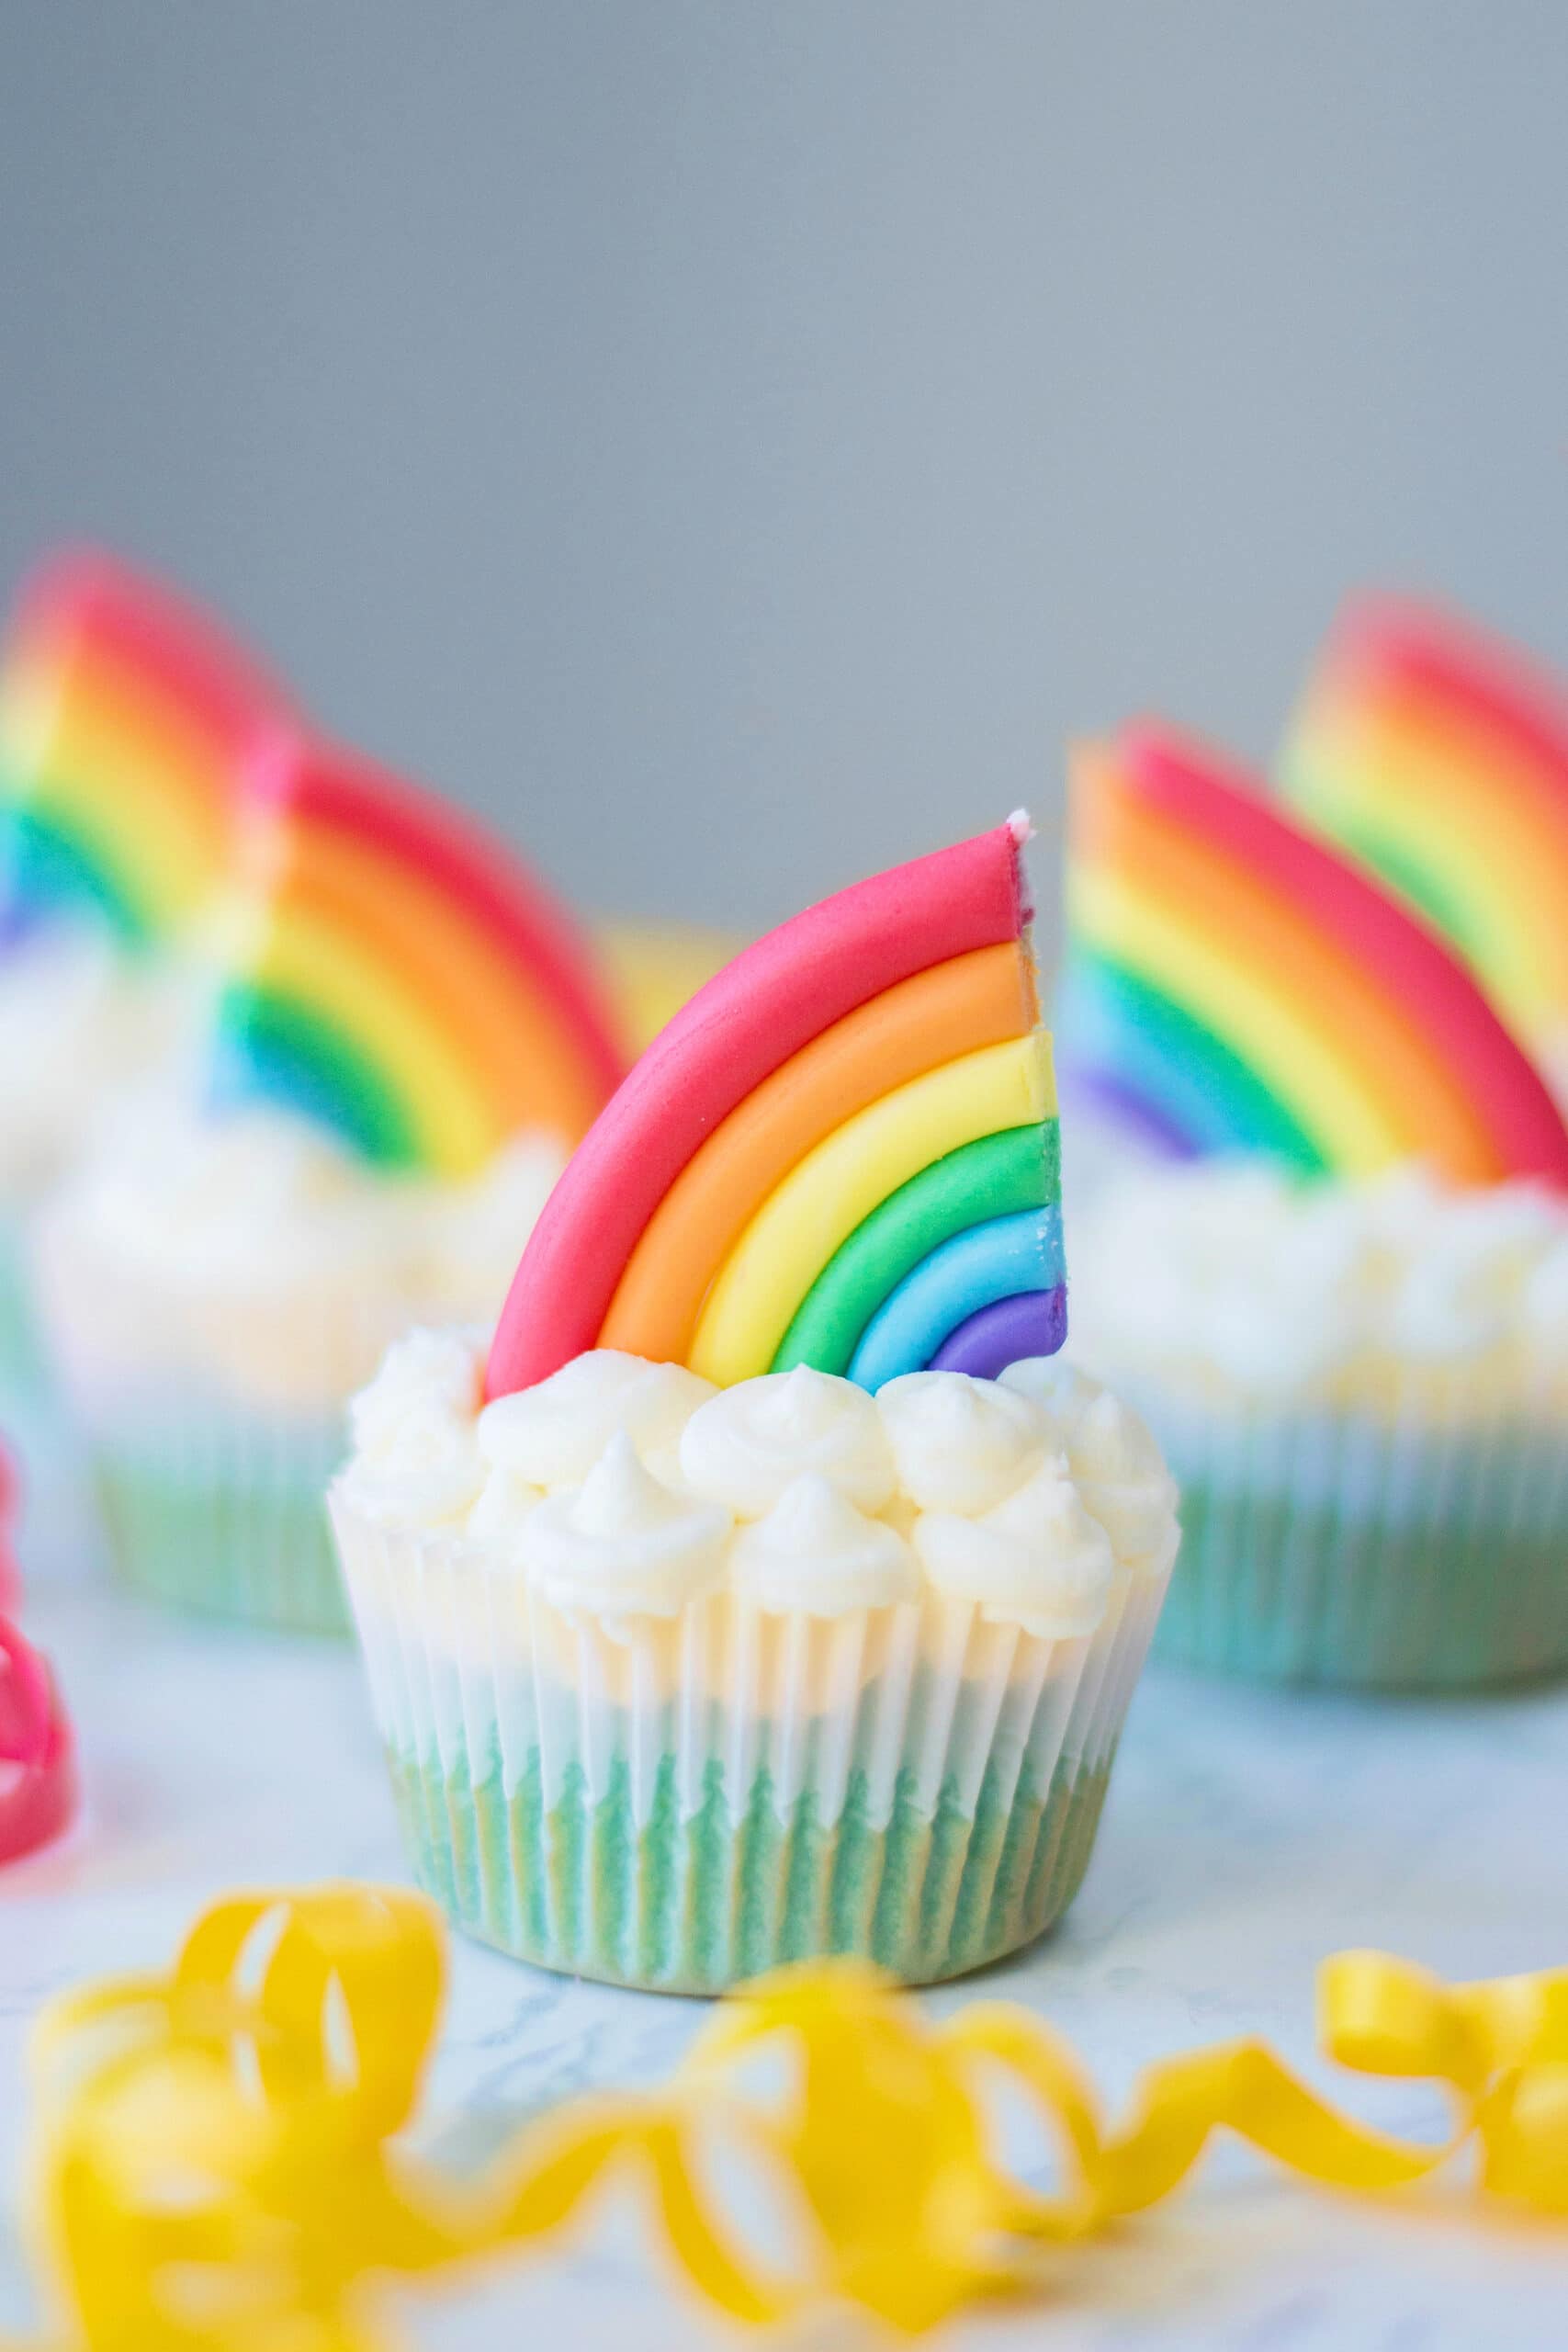 Rainbow cupcake recipe from extreme couponing mom.